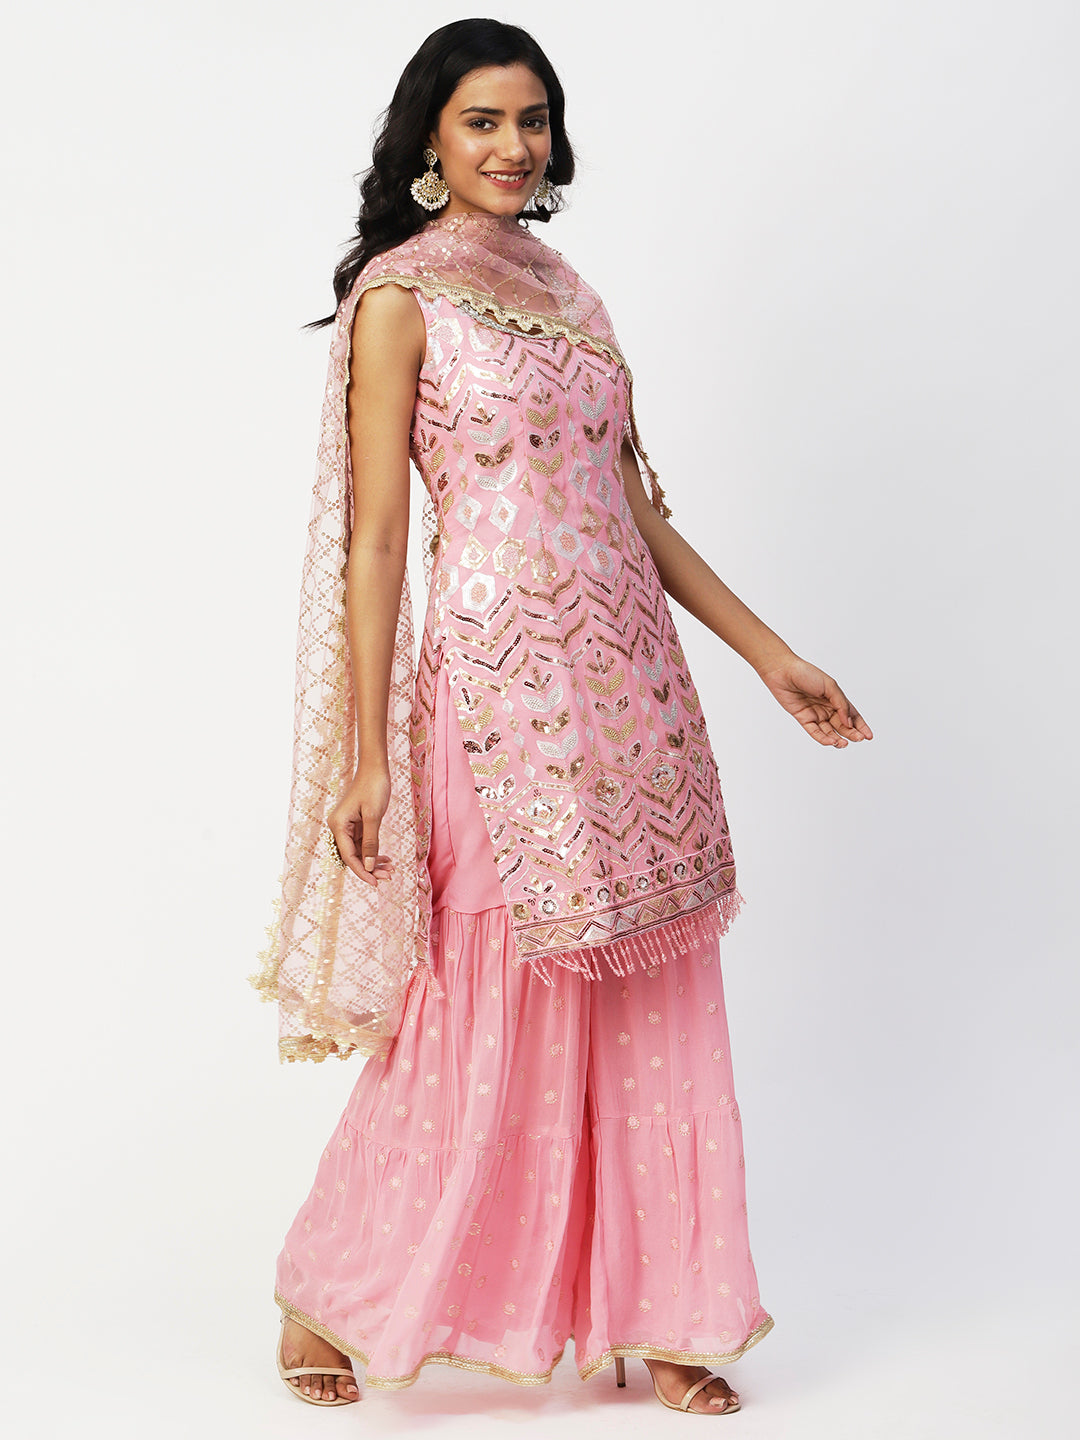 Pink Georgette Sharara Suit with Silver and Gold Sequin Embellishments - PepaBai